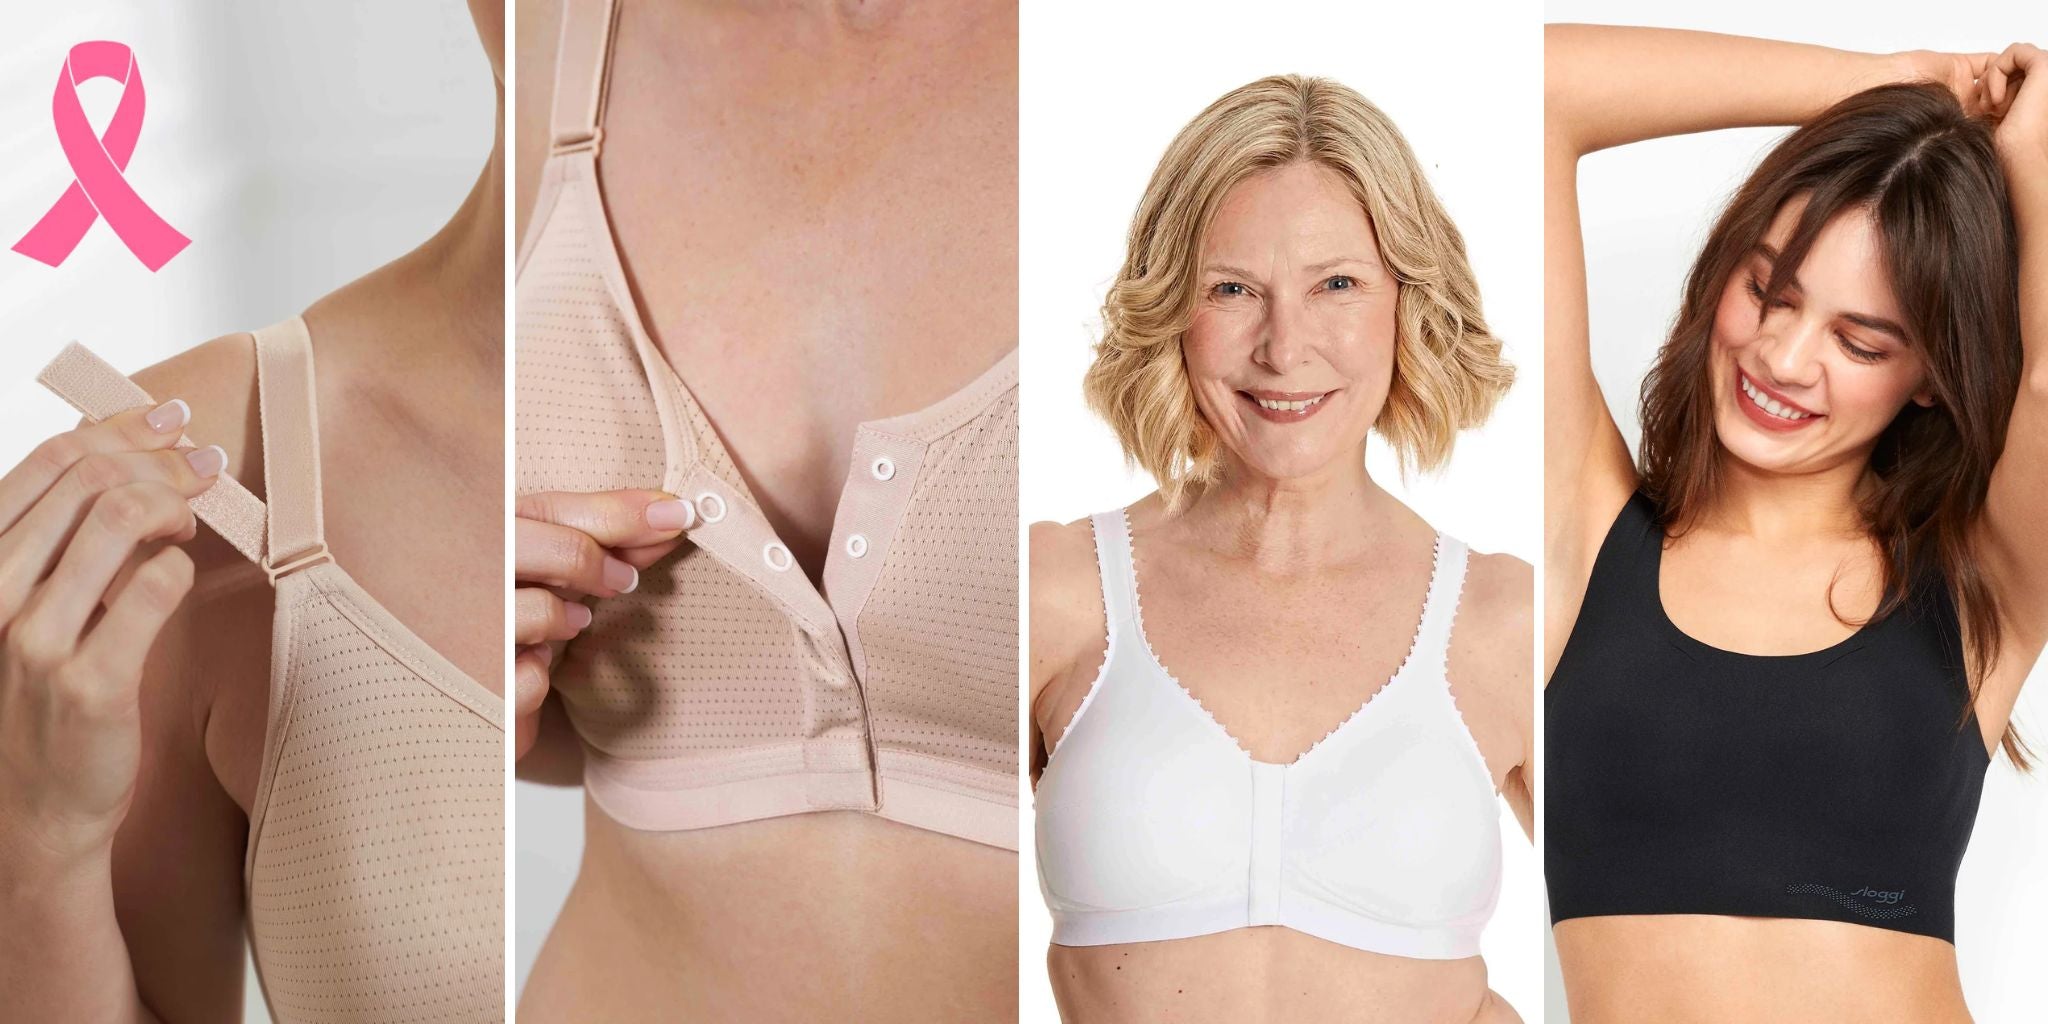 Uplifting advice: Bras after breast cancer surgery